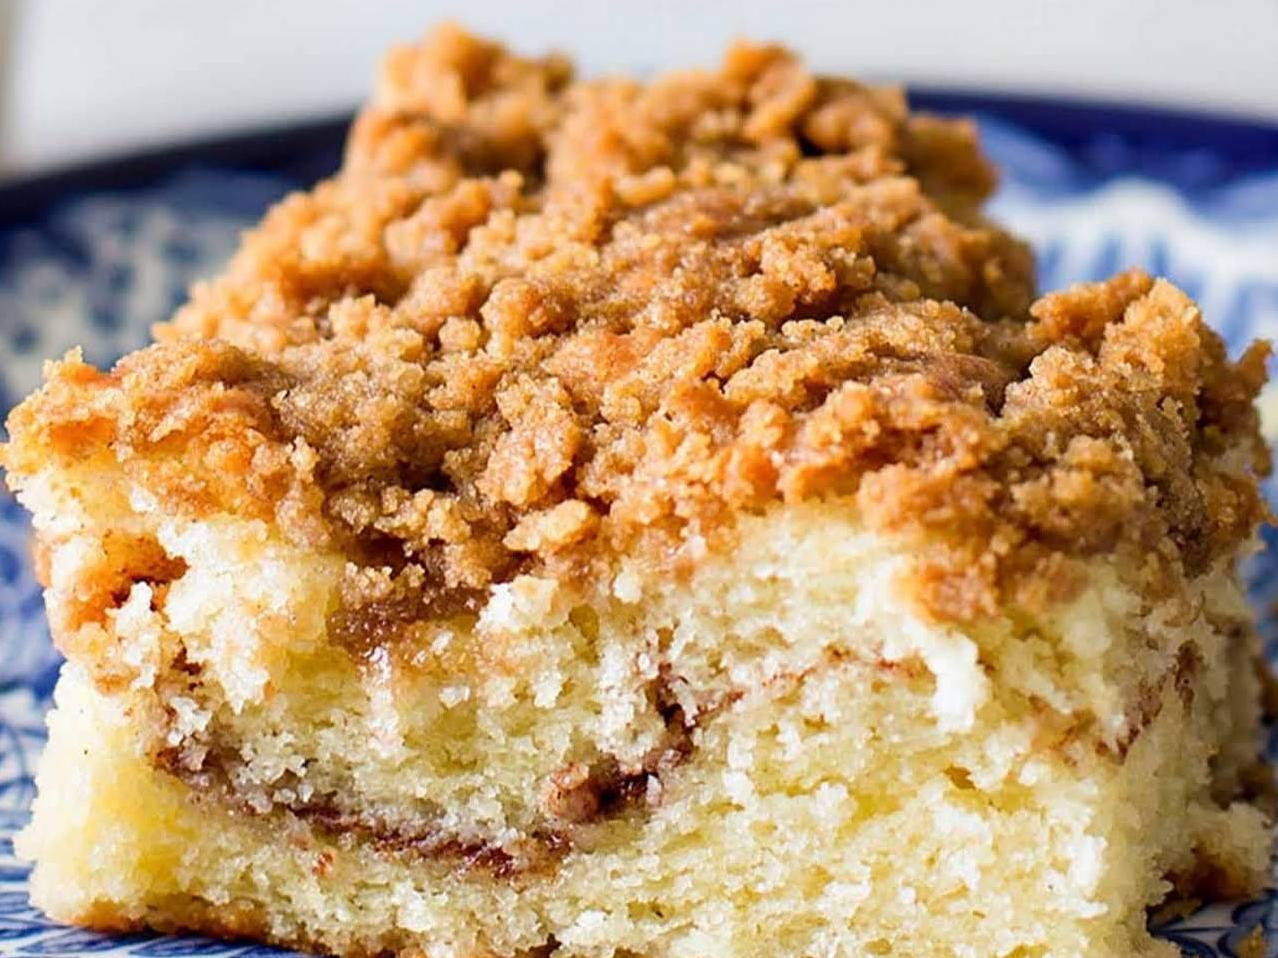  The cinnamon and nutmeg spice blend gives this cake a warm, cozy flavor that's perfect for chilly mornings.